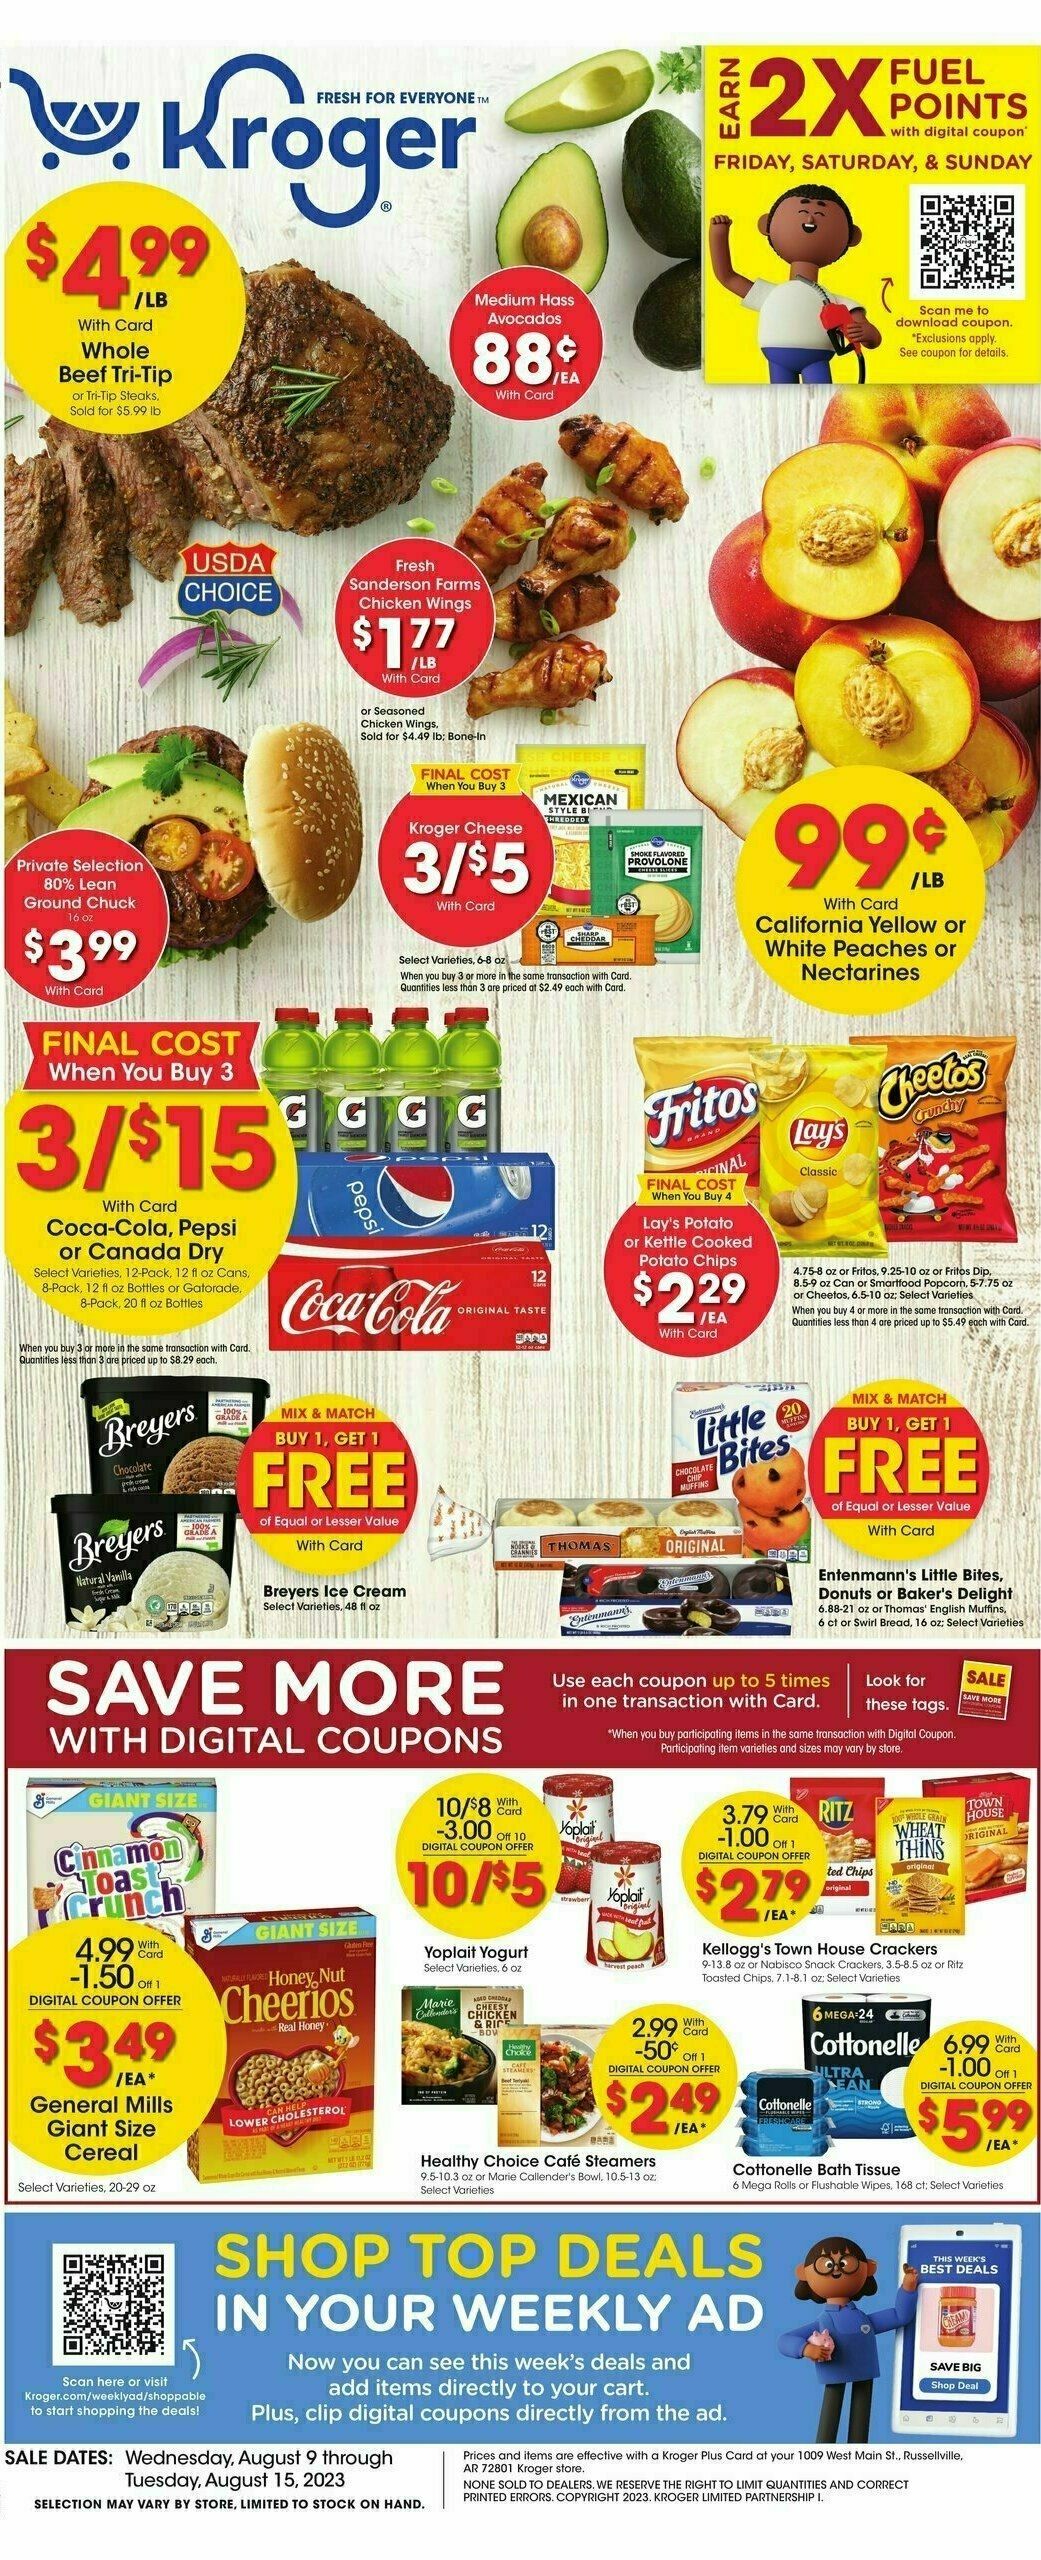 Kroger Weekly Ad from August 9